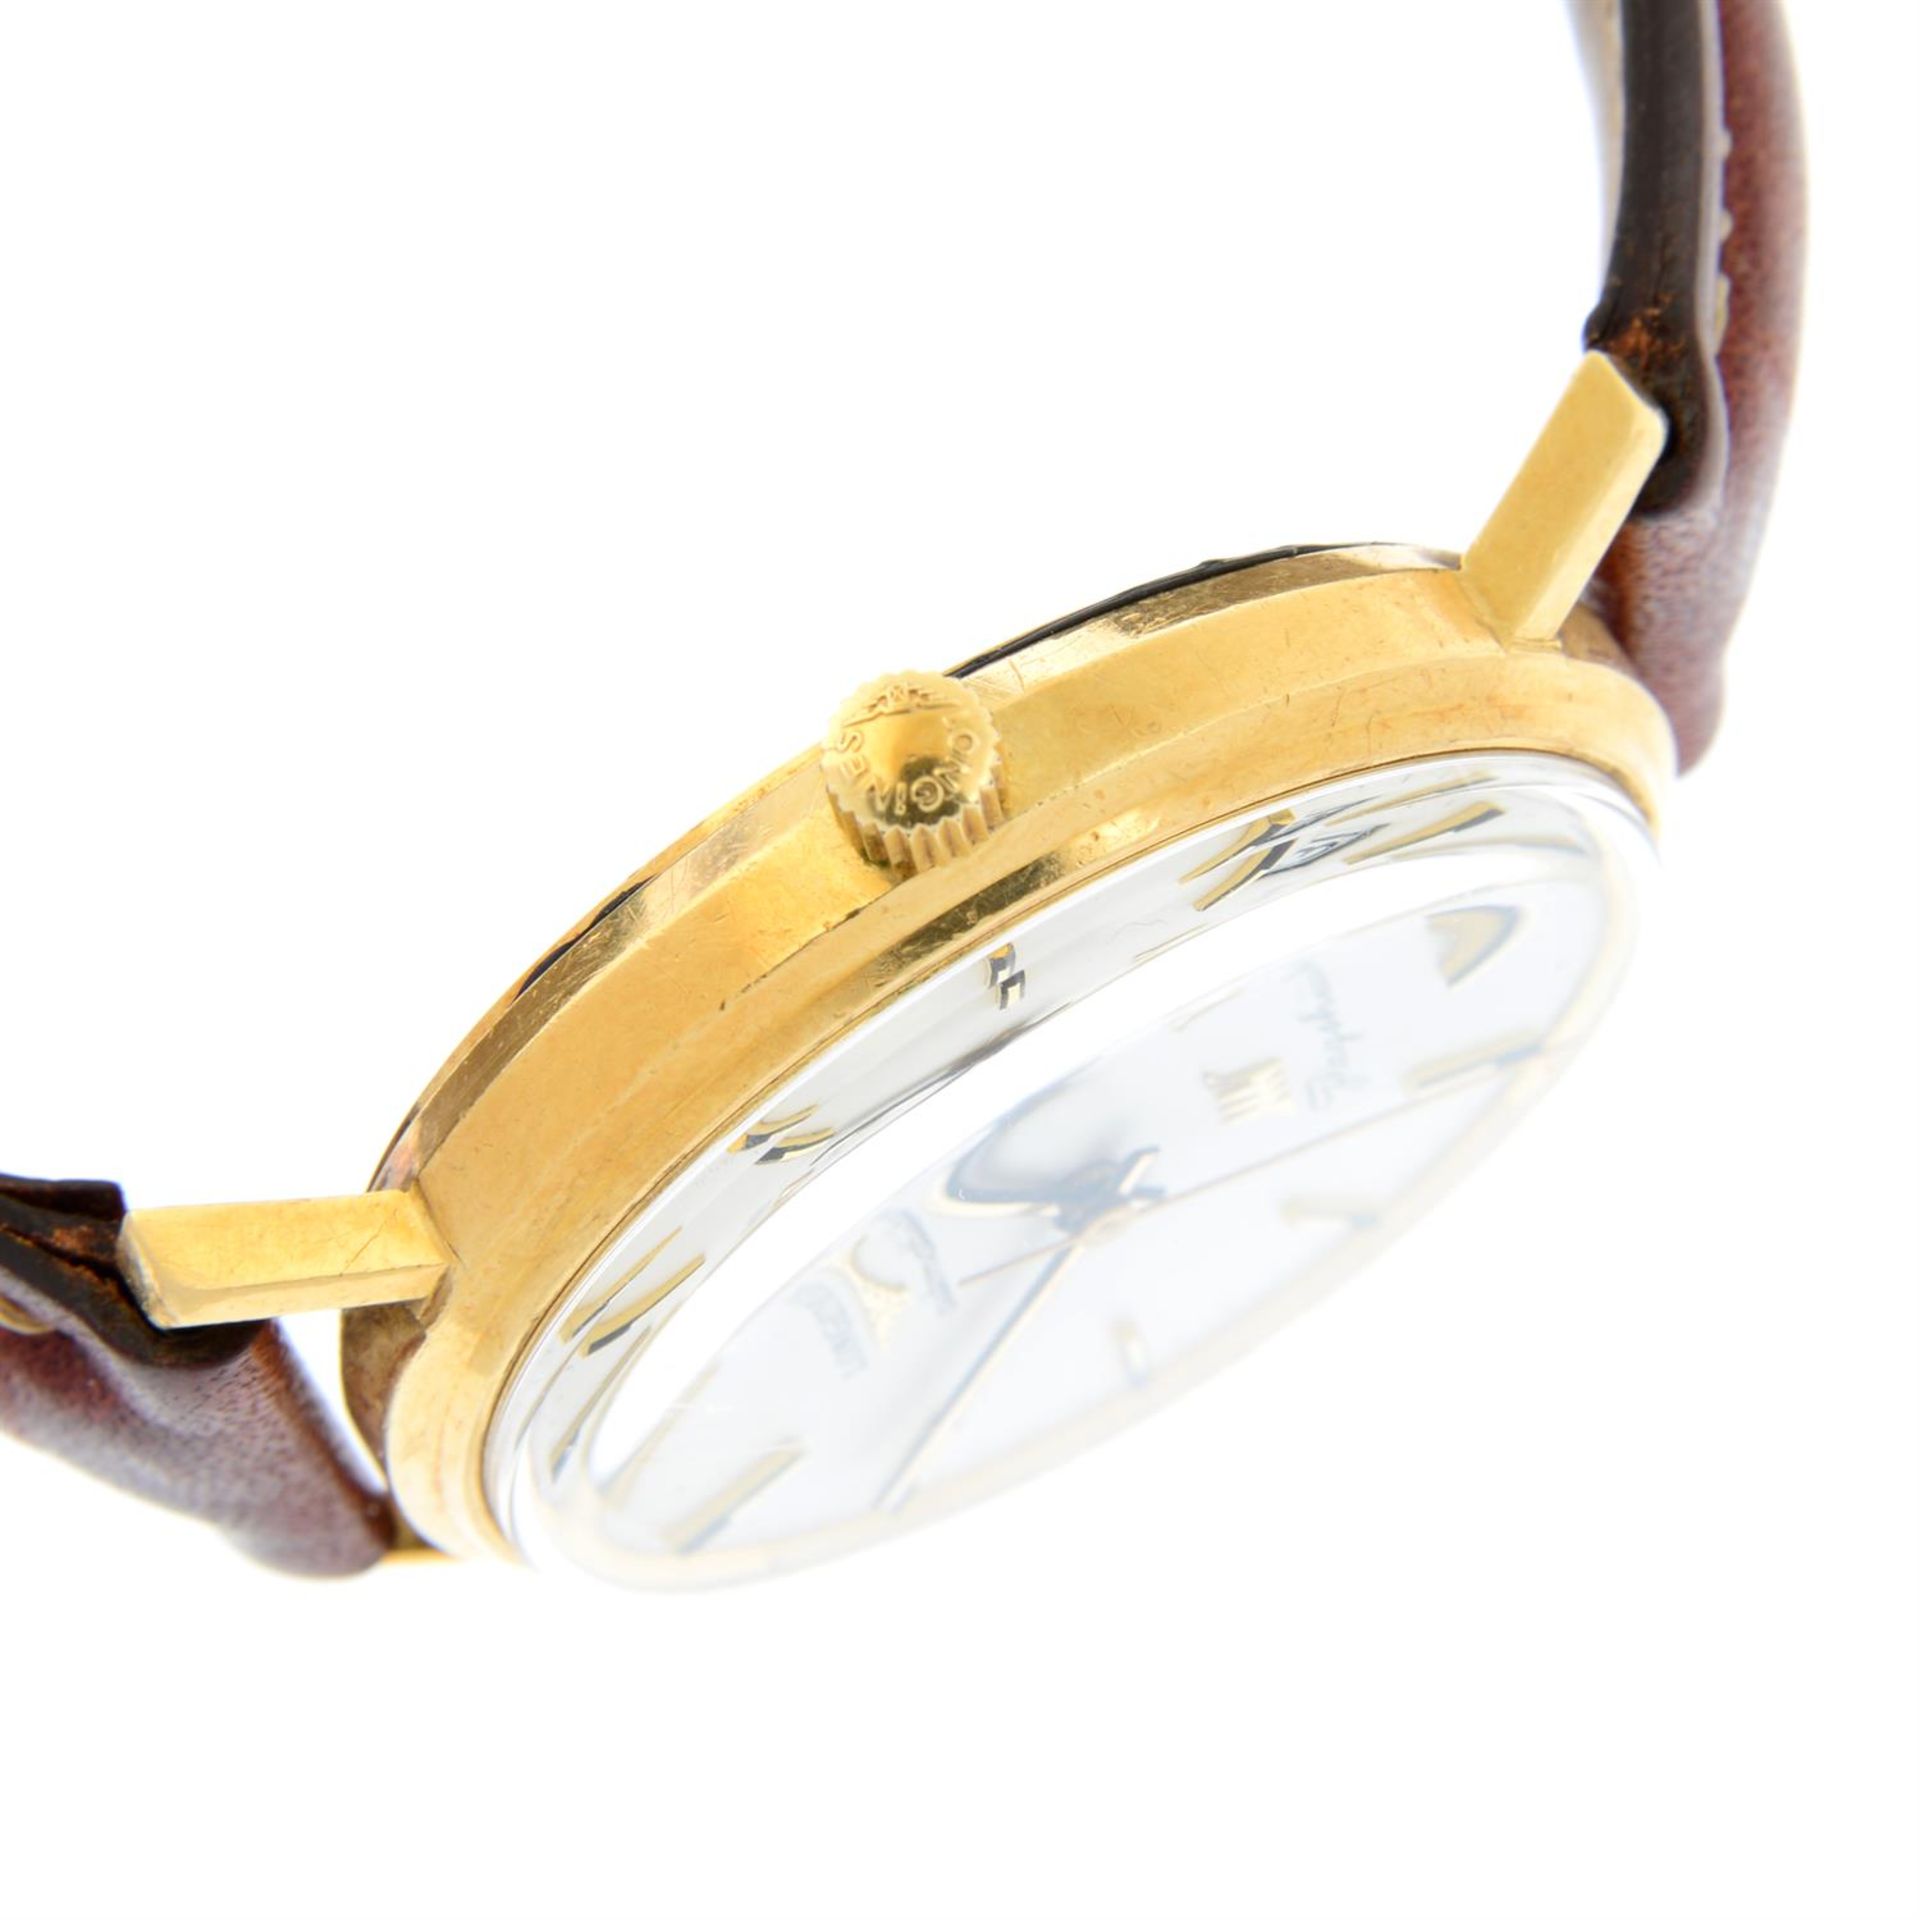 LONGINES - a yellow metal Flagship wrist watch, 35mm. - Image 3 of 5